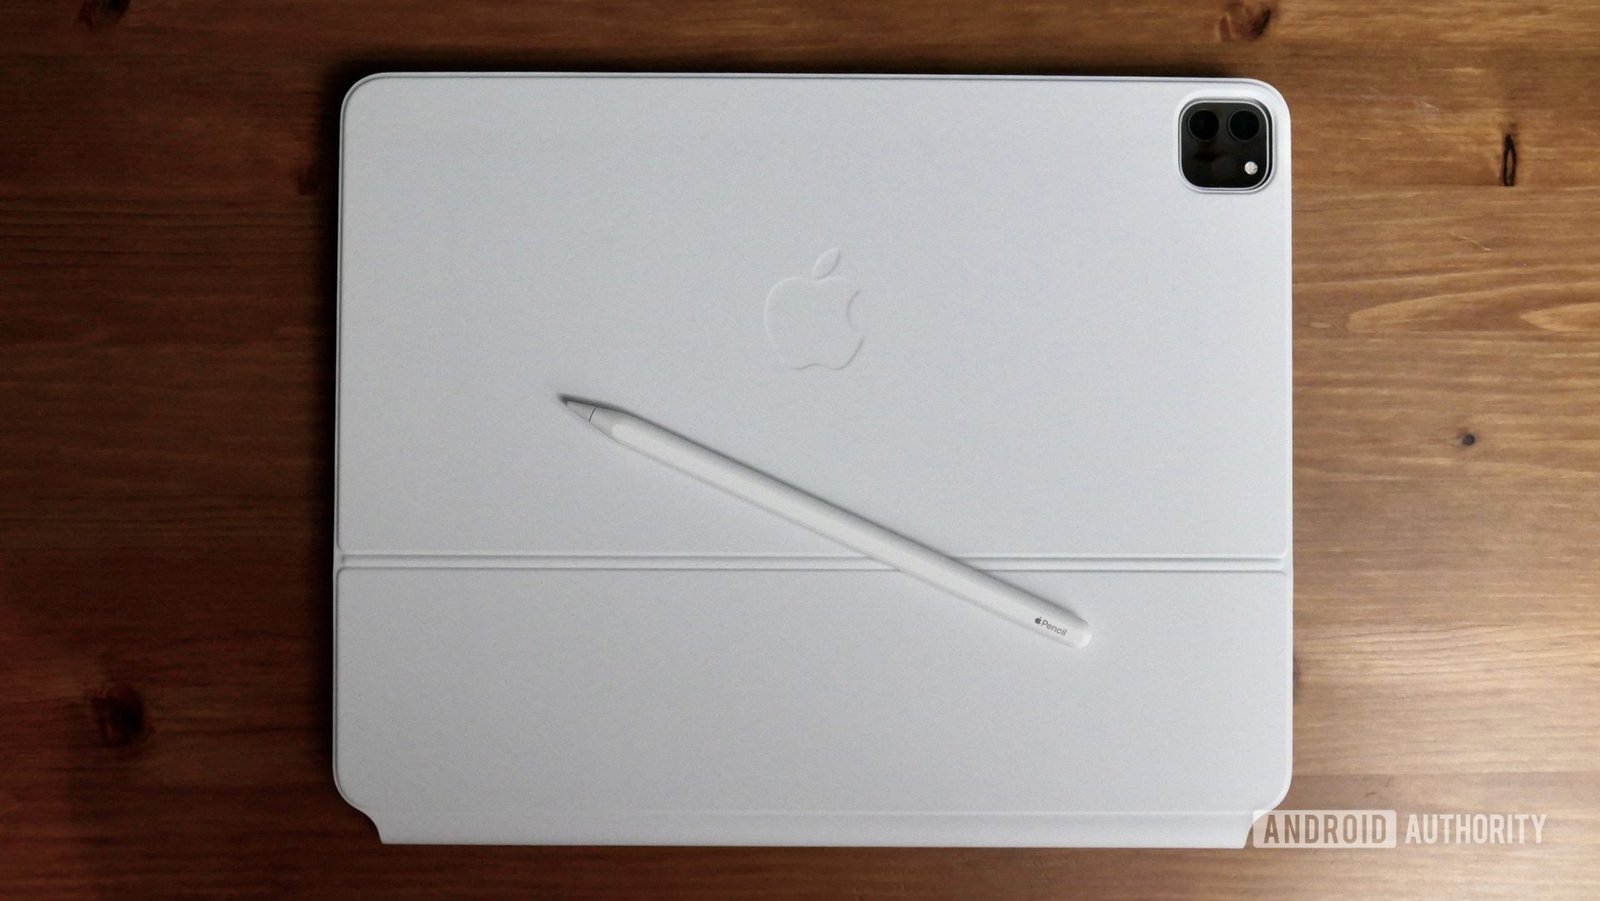 At 39% off, the Apple Pencil 2 has never been cheaper